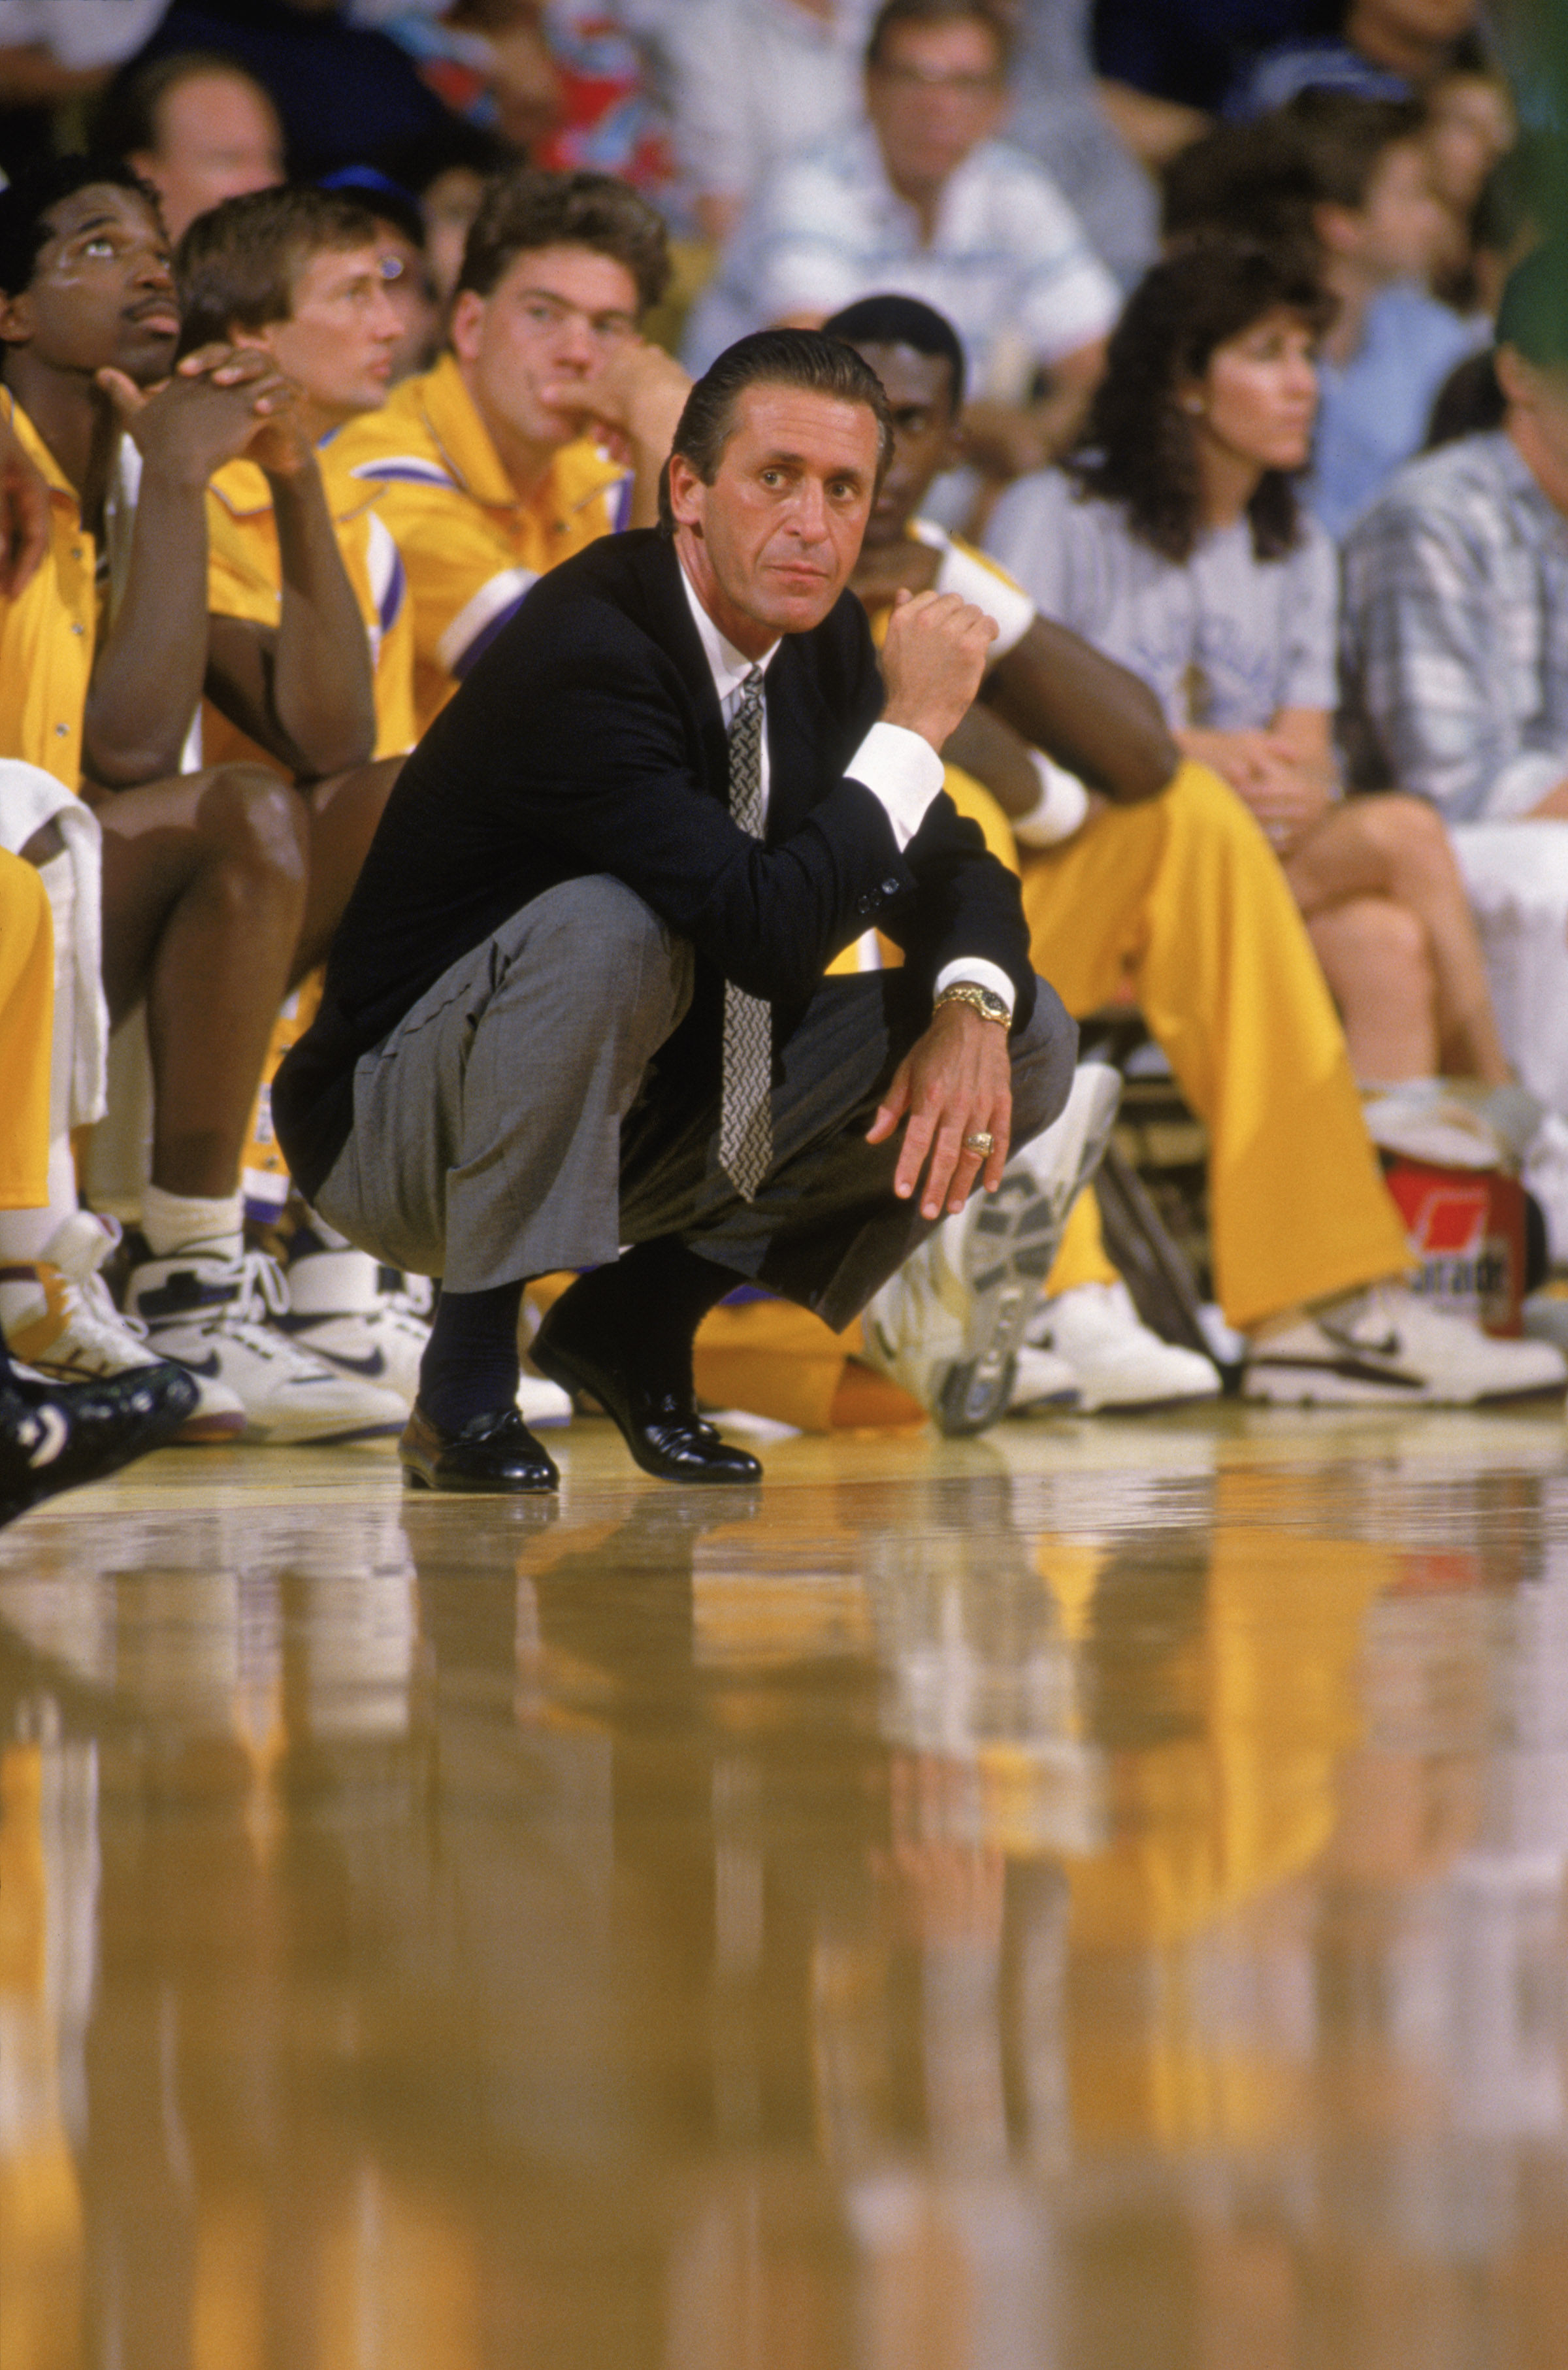 LOS ANGELES - 1988:  Head coach Pat Riley of the Los Angeles Lakers crouches on the sideline during an NBA game at the Great Western Forum in Los Angeles, California in 1988.  (Photo by: Tim Defrisco/Getty Images)